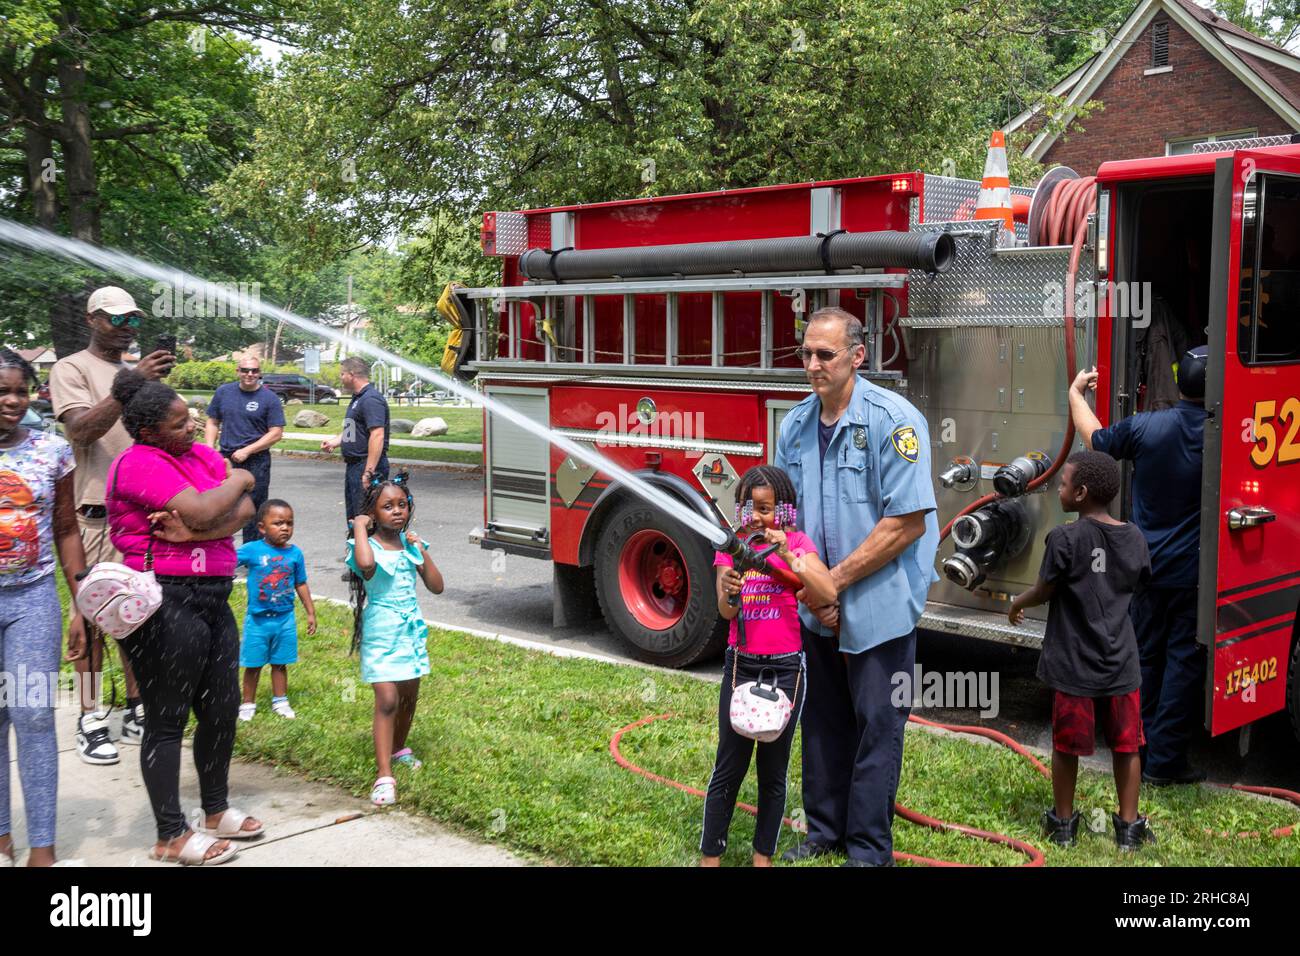 Detroit, Michigan - The Detroit Fire Department allows children to handle a fire hose as residents of the Morningside neighborhood hold a picnic/party Stock Photo